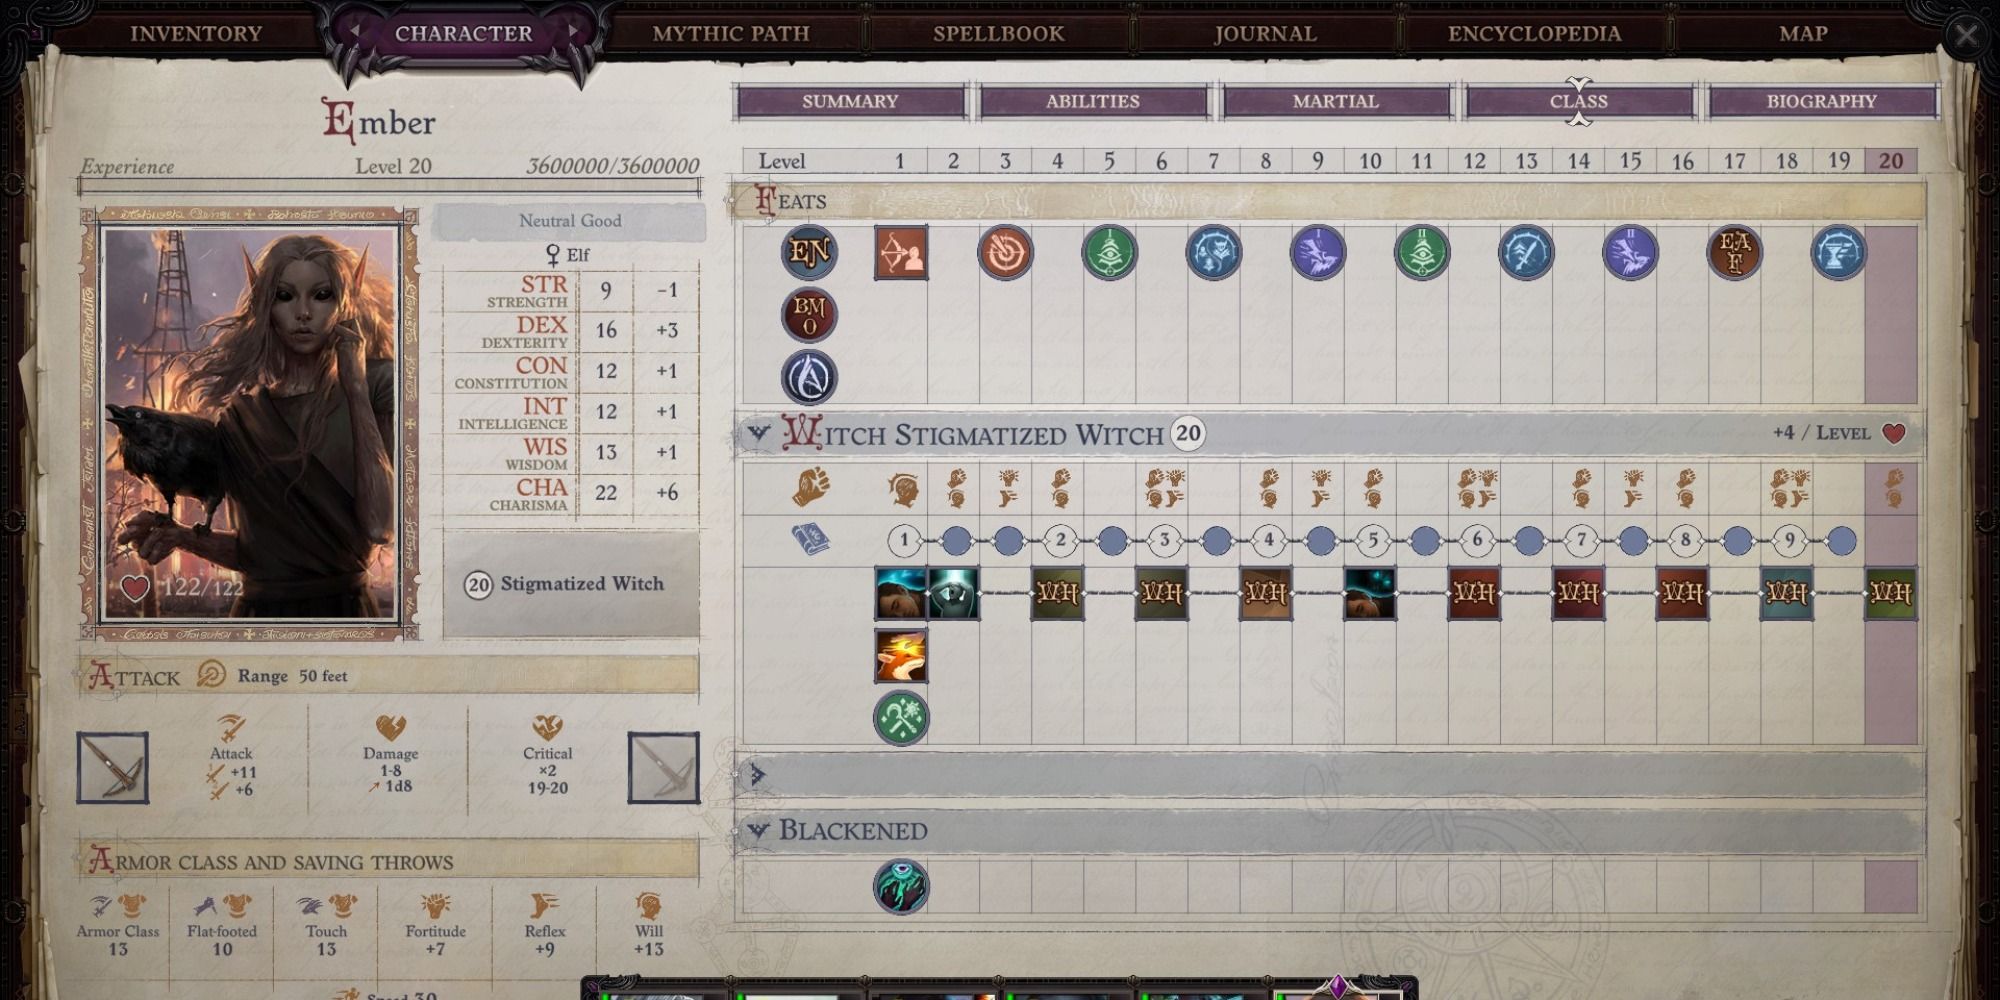 Stigmatized Witch Build for Ember in Pathfinder Wrath of the Righteous